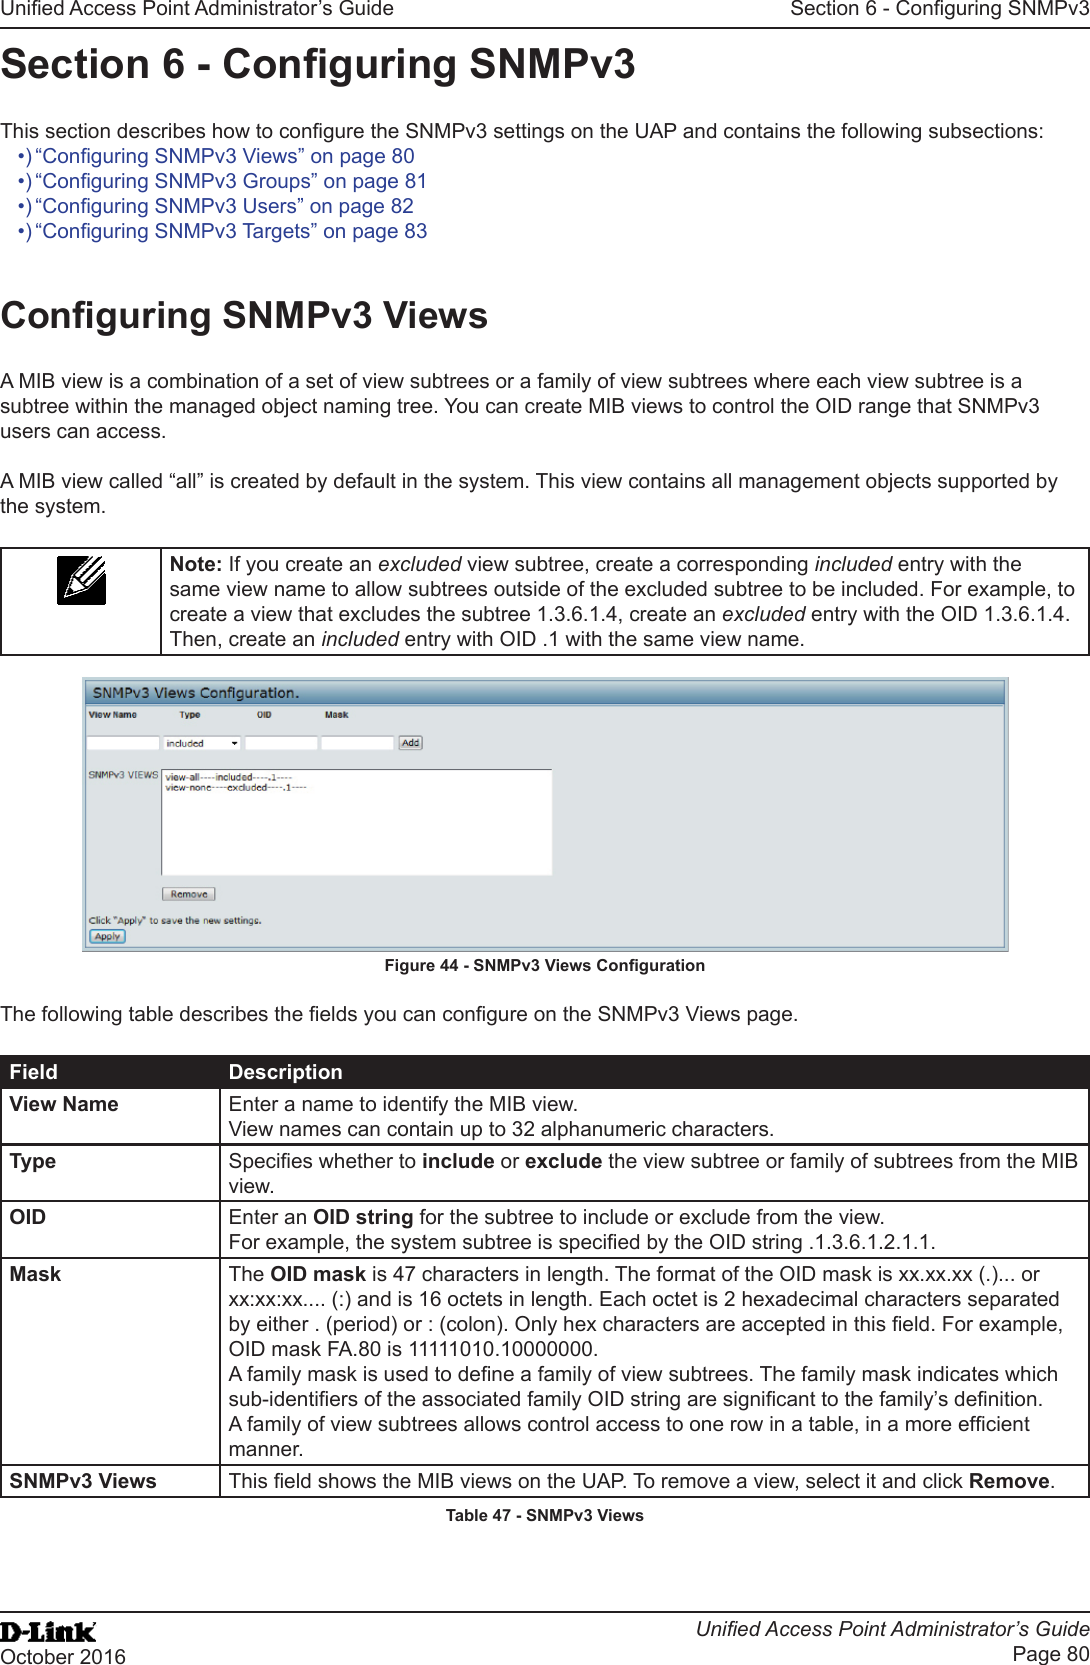 Unied Access Point Administrator’s GuideUnied Access Point Administrator’s GuidePage 80October 2016Section 6 - Conguring SNMPv3Section 6 - Conguring SNMPv3This section describes how to congure the SNMPv3 settings on the UAP and contains the following subsections:•) “Conguring SNMPv3 Views” on page 80•) “Conguring SNMPv3 Groups” on page 81•) “Conguring SNMPv3 Users” on page 82•) “Conguring SNMPv3 Targets” on page 83Conguring SNMPv3 ViewsA MIB view is a combination of a set of view subtrees or a family of view subtrees where each view subtree is a subtree within the managed object naming tree. You can create MIB views to control the OID range that SNMPv3 users can access.A MIB view called “all” is created by default in the system. This view contains all management objects supported by the system.Note: If you create an excluded view subtree, create a corresponding included entry with the same view name to allow subtrees outside of the excluded subtree to be included. For example, to create a view that excludes the subtree 1.3.6.1.4, create an excluded entry with the OID 1.3.6.1.4. Then, create an included entry with OID .1 with the same view name. Figure 44 - SNMPv3 Views CongurationThe following table describes the elds you can congure on the SNMPv3 Views page.Field DescriptionView Name Enter a name to identify the MIB view. View names can contain up to 32 alphanumeric characters.Type Species whether to include or exclude the view subtree or family of subtrees from the MIB view.OID Enter an OID string for the subtree to include or exclude from the view. For example, the system subtree is specied by the OID string .1.3.6.1.2.1.1.Mask The OID mask is 47 characters in length. The format of the OID mask is xx.xx.xx (.)... or xx:xx:xx.... (:) and is 16 octets in length. Each octet is 2 hexadecimal characters separated by either . (period) or : (colon). Only hex characters are accepted in this eld. For example, OID mask FA.80 is 11111010.10000000.A family mask is used to dene a family of view subtrees. The family mask indicates which sub-identiers of the associated family OID string are signicant to the family’s denition. A family of view subtrees allows control access to one row in a table, in a more efcient manner.SNMPv3 Views This eld shows the MIB views on the UAP. To remove a view, select it and click Remove.Table 47 - SNMPv3 Views